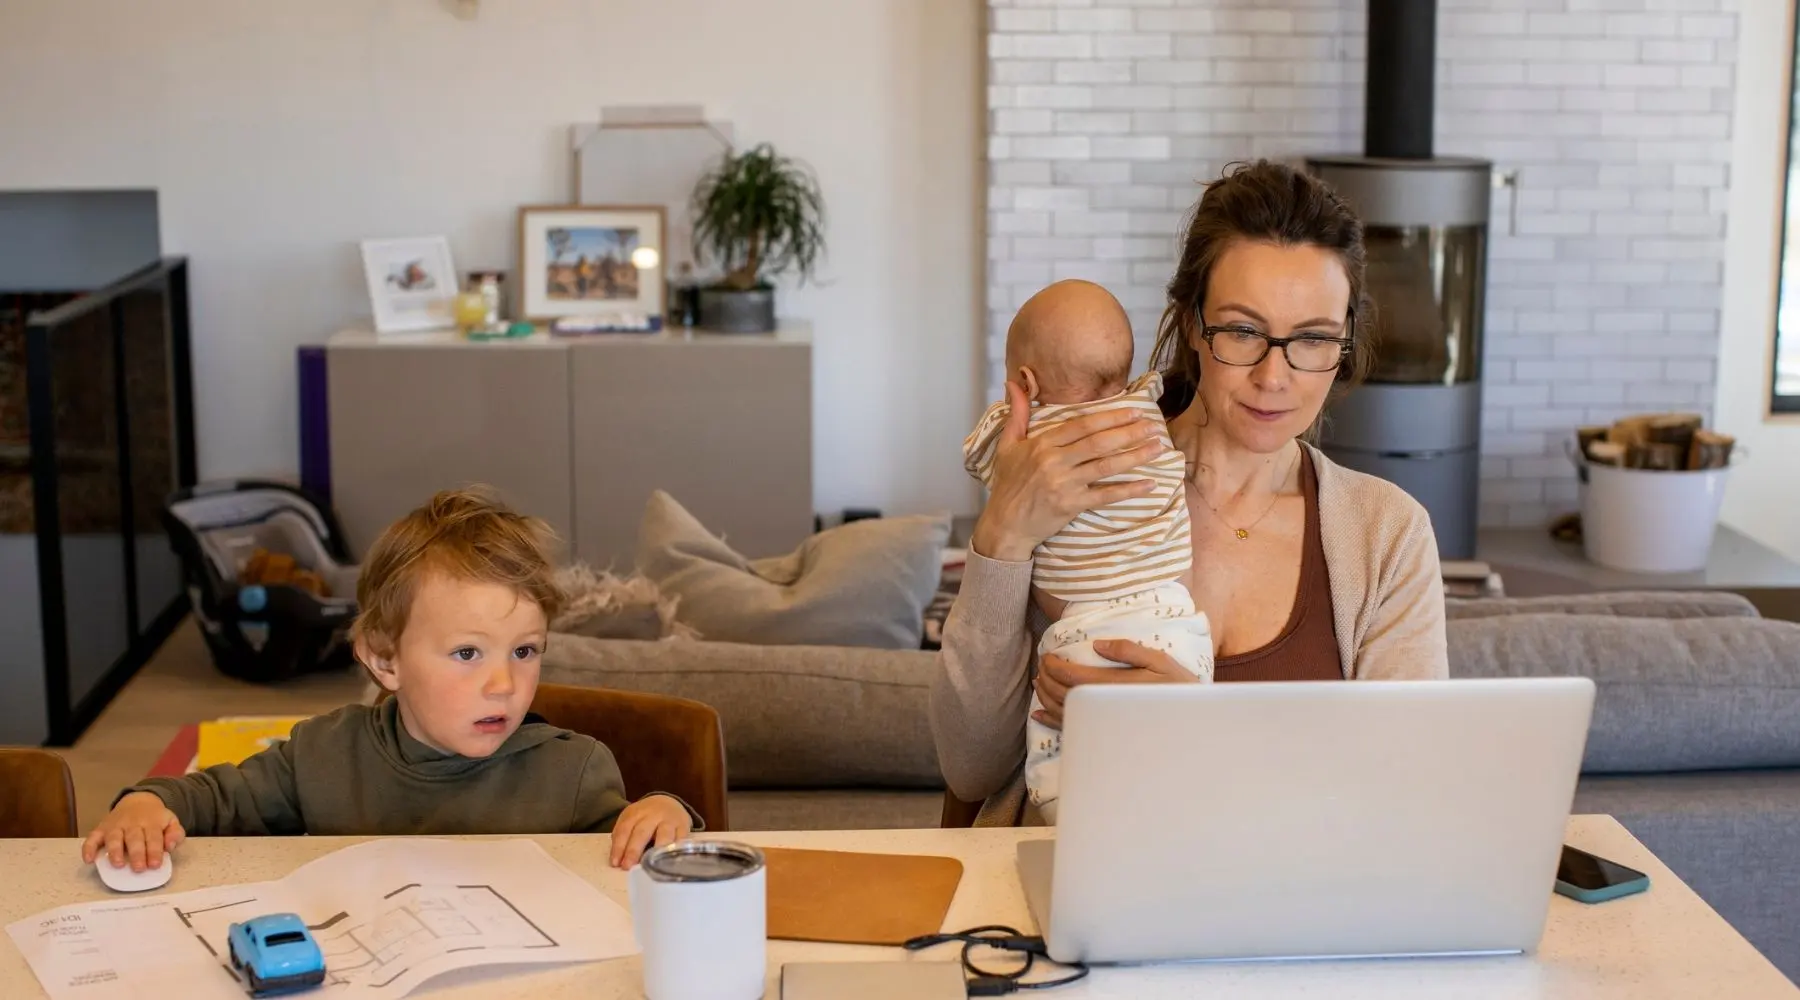 A woman works from home alongside her two young children.